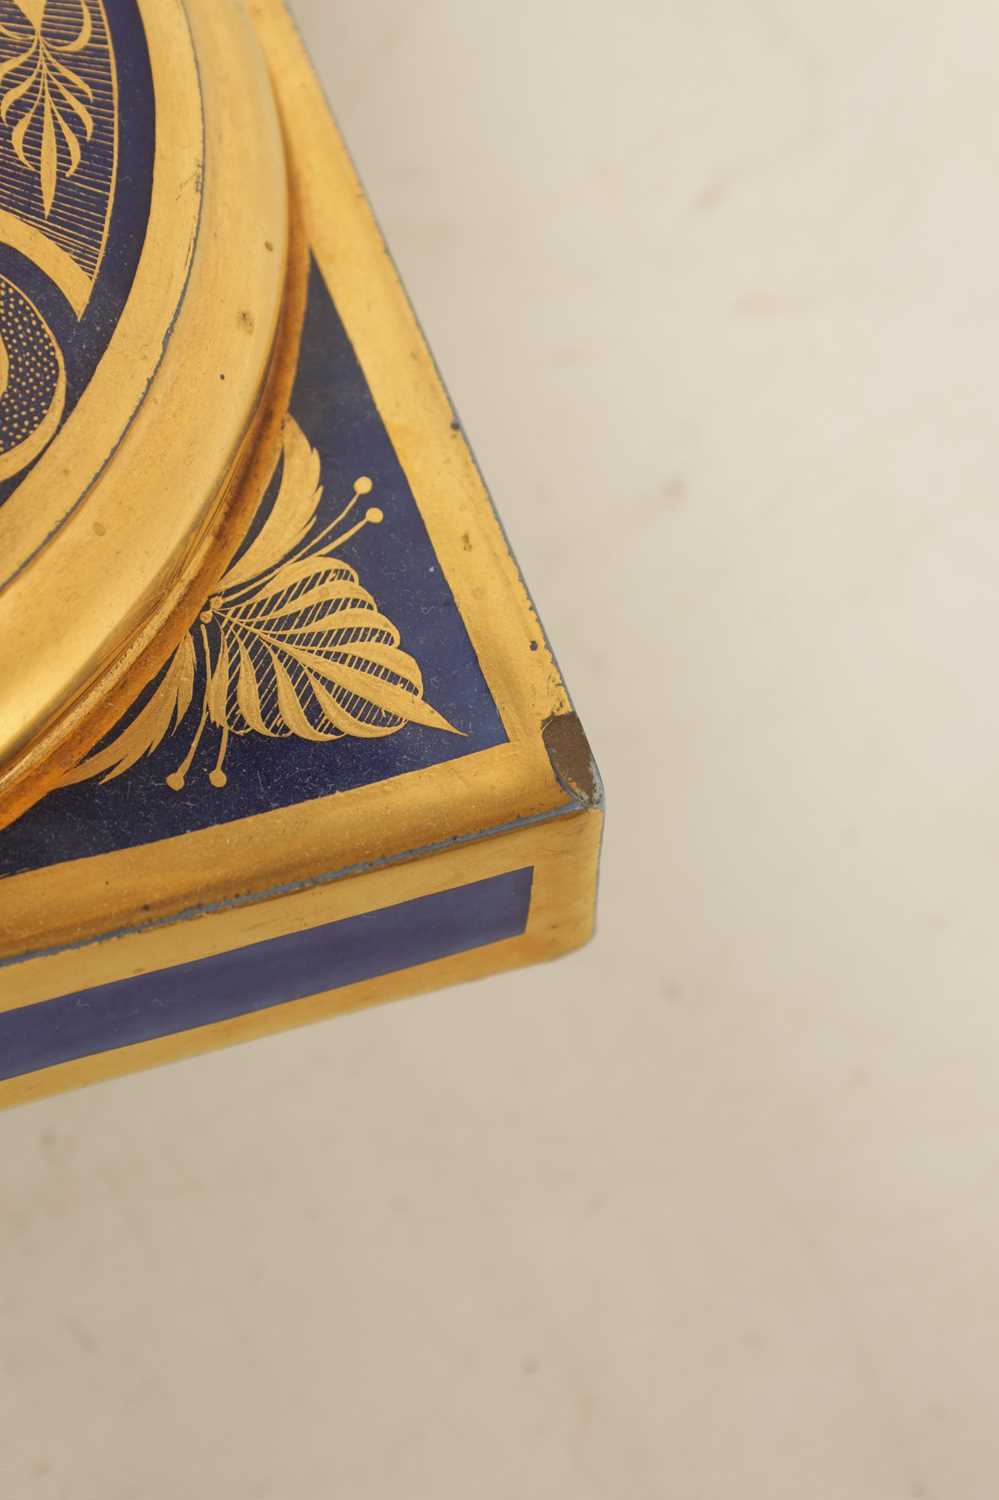 AN EARLY 19TH CENTURY FRENCH PARIS PORCELAIN ROYAL BLUE AND GILT URN SHAPED PEDESTAL VASE - Image 8 of 8